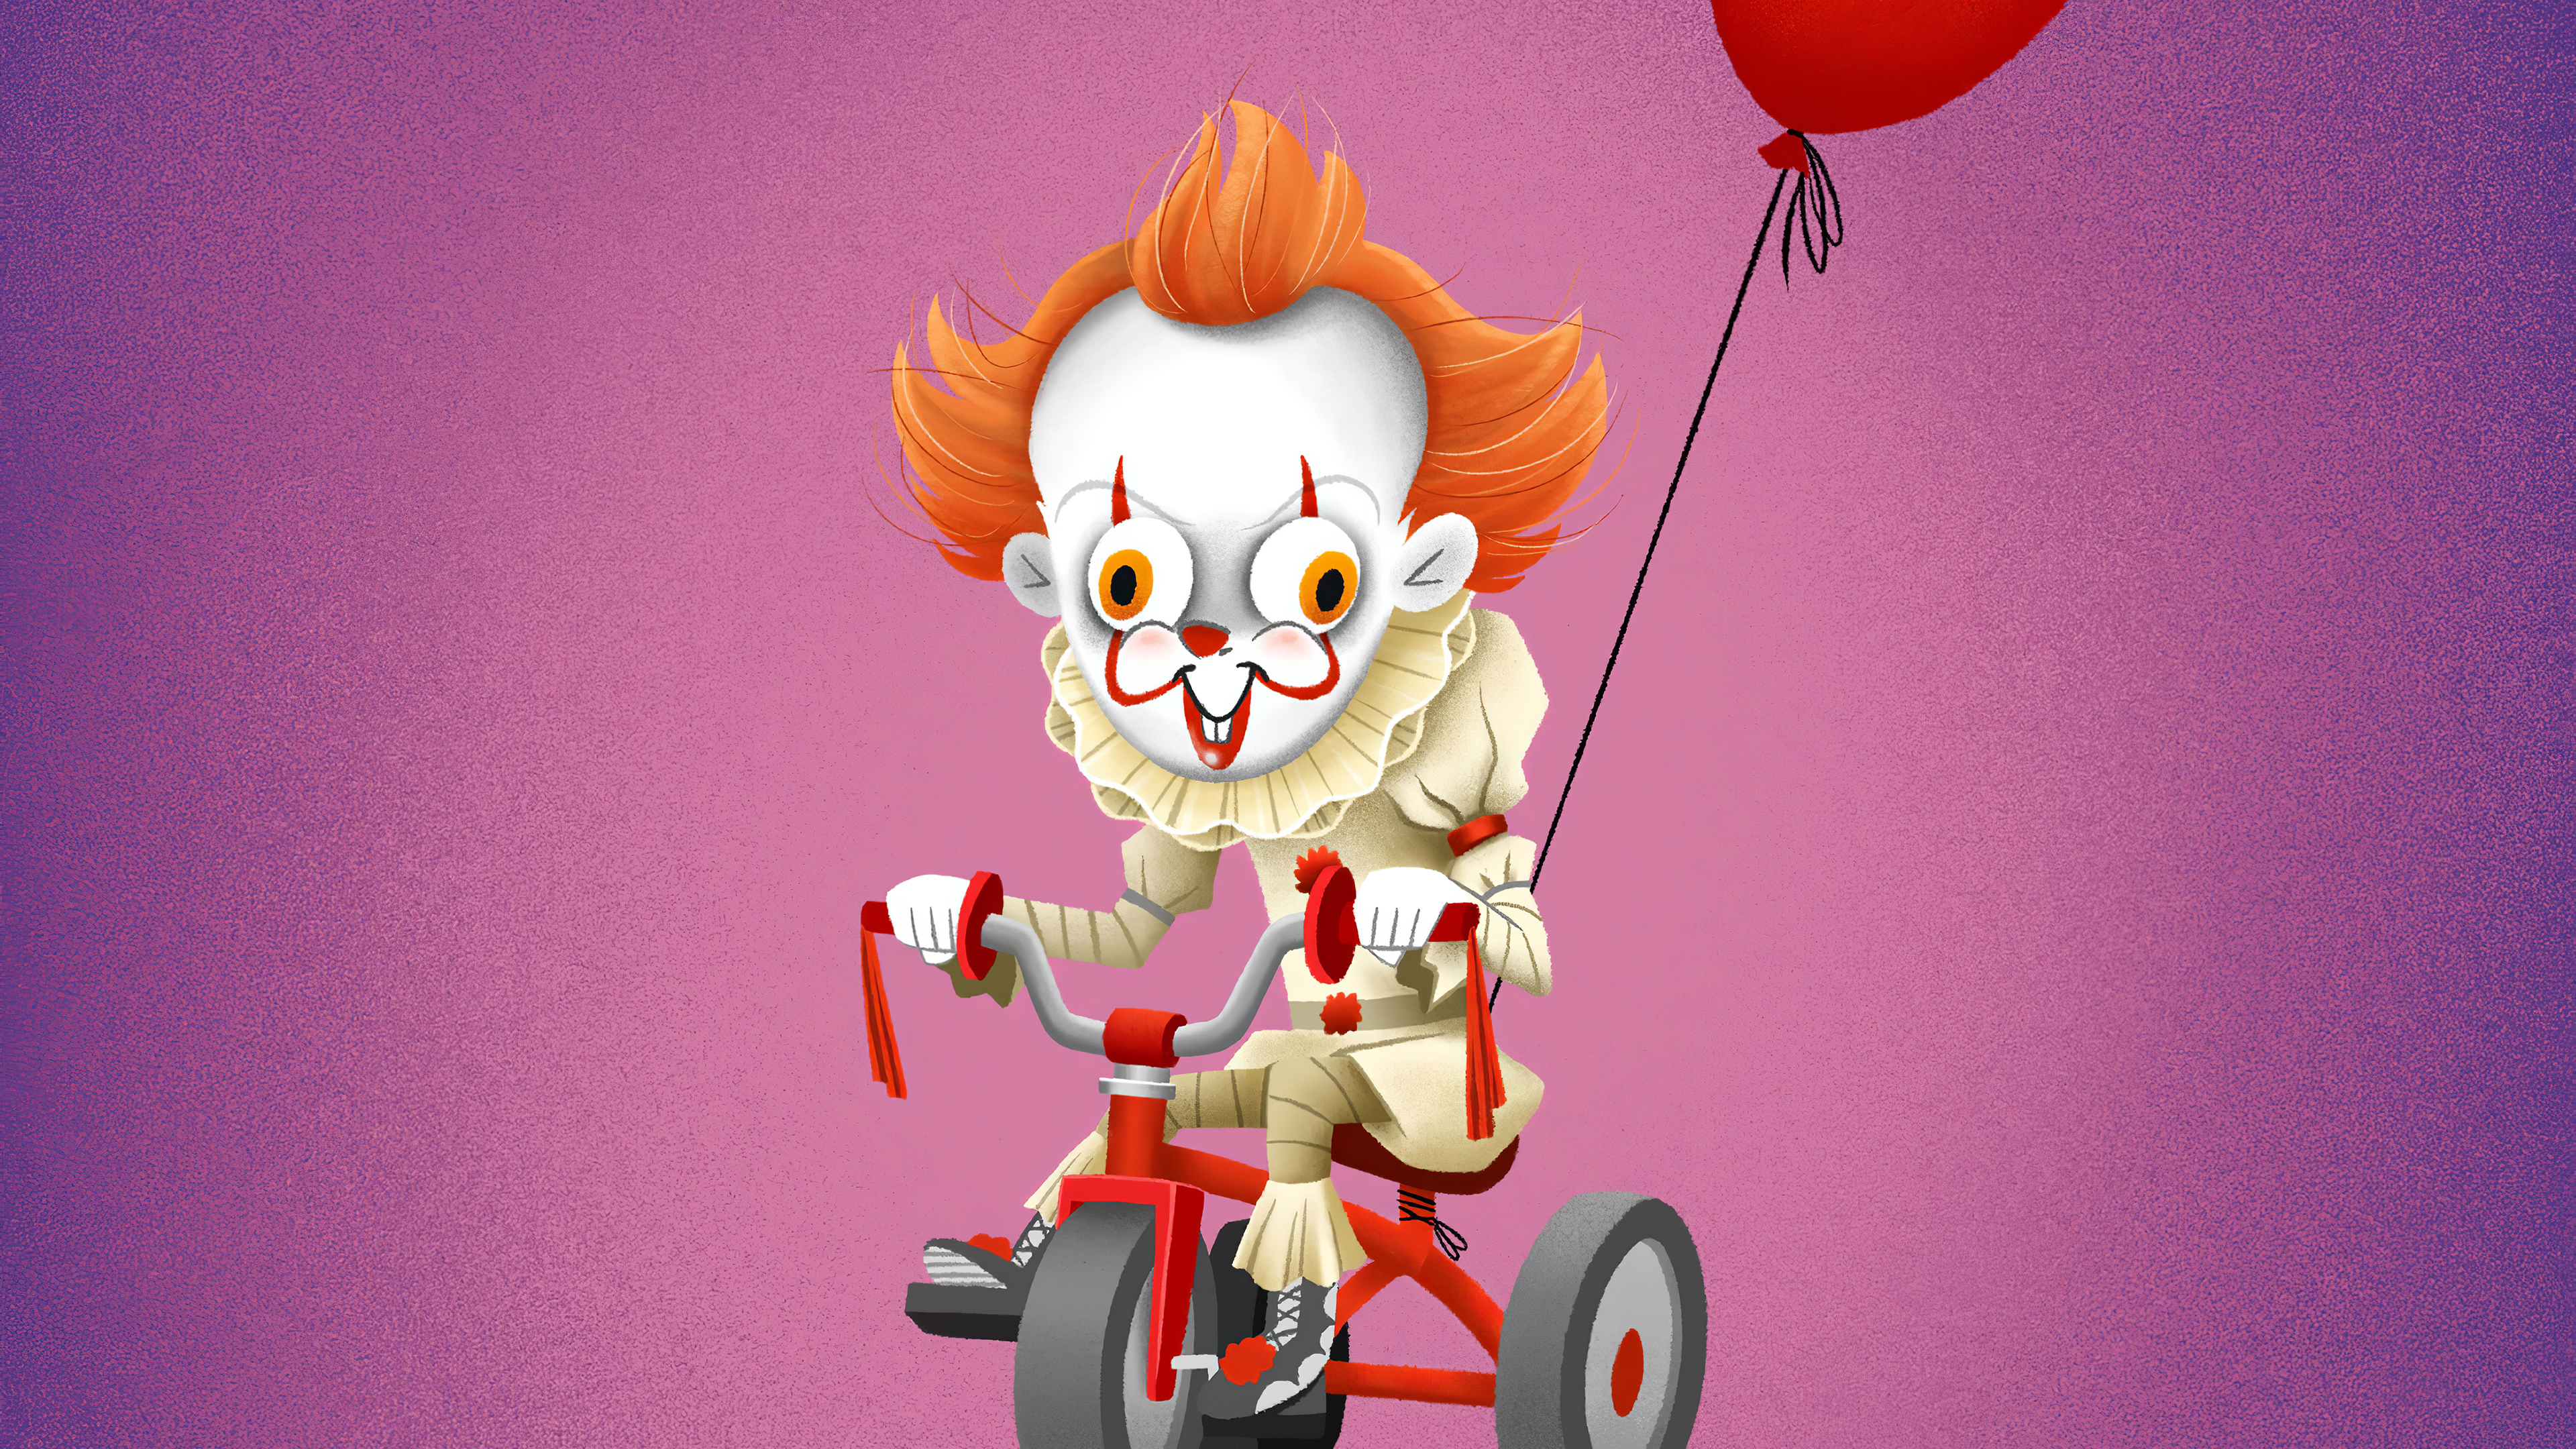 Pennywise It Clown 3840x2160